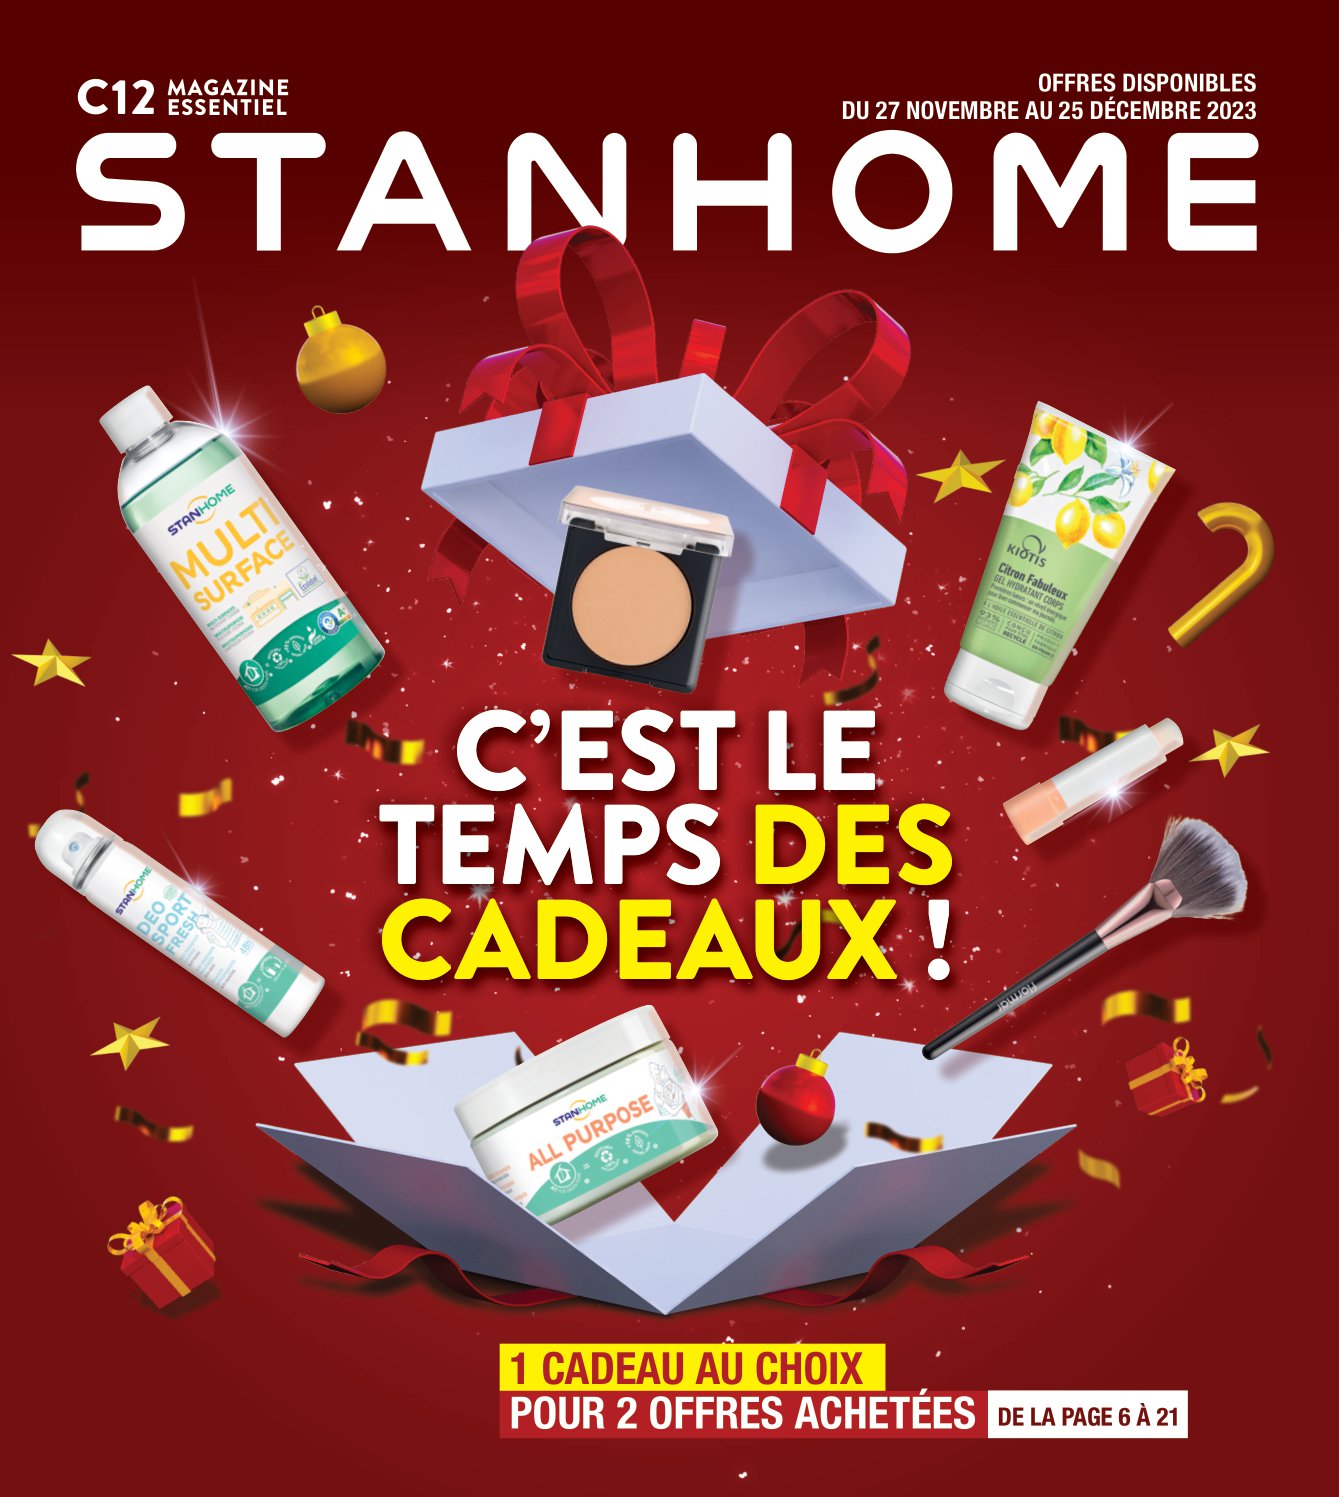 Catalogue Stanhome Noël 2023 1 – stannhome noel a 01